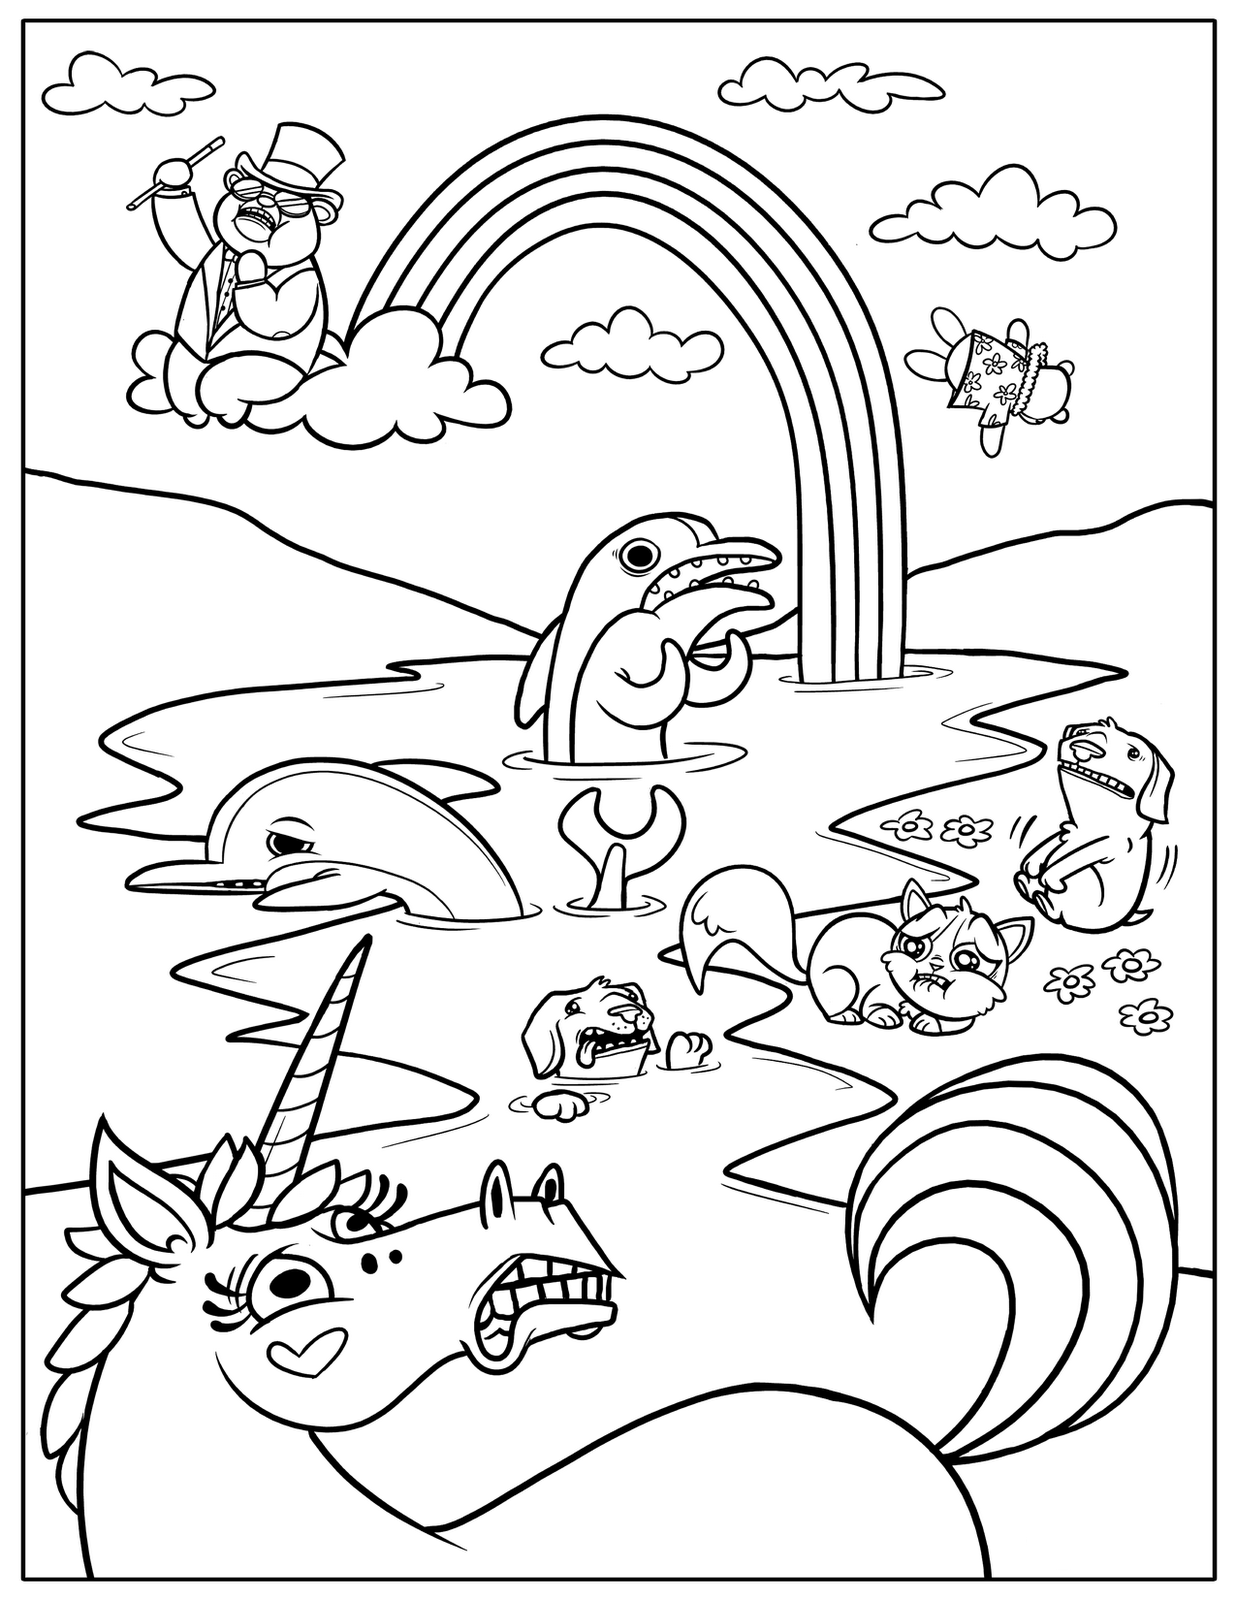 Rainbow Coloring Page Ally39s Party